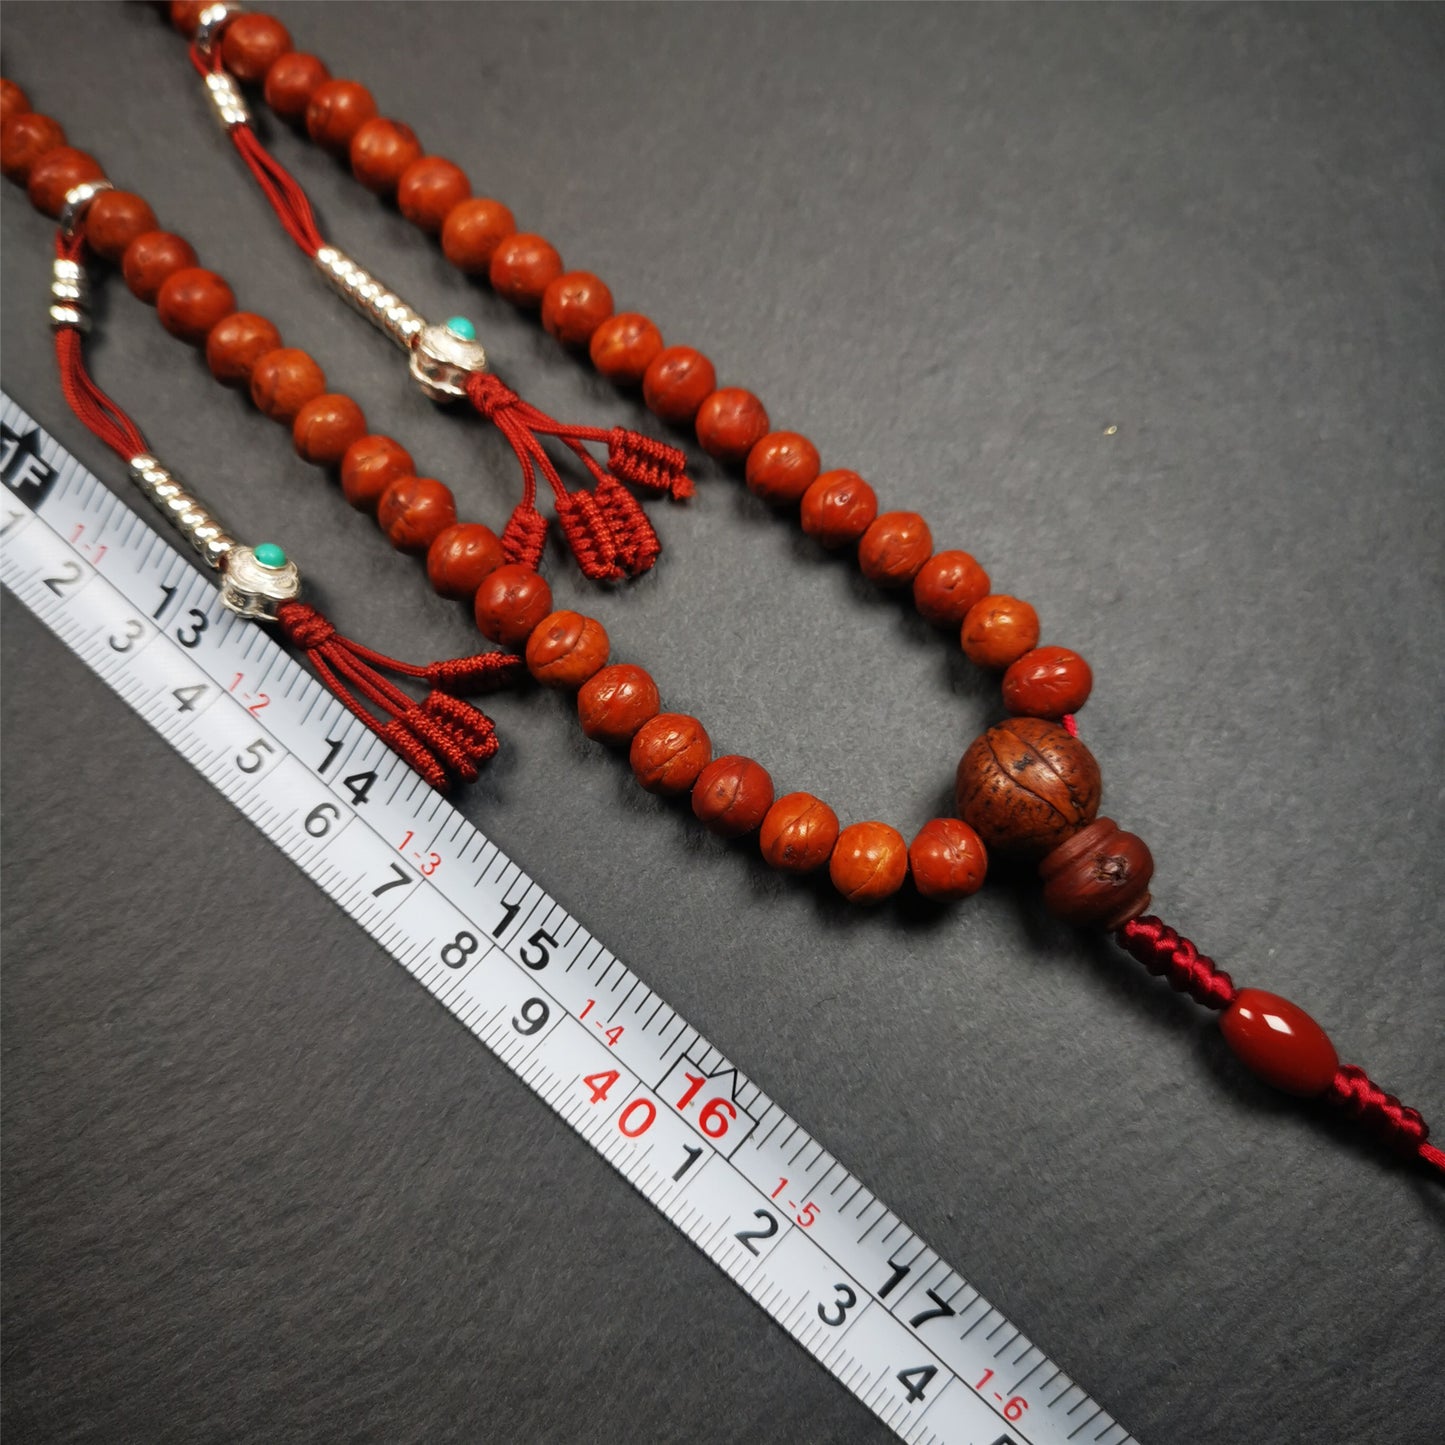 This bodhi beads mala is made by Tibetan craftsmen,about 30 years old.  It is composed of 108 bodhi seed beads, equipped with agate beads, cinnabar beads,silver bead counters are installed on both sides, 1 mantra dot clip,and finally consists a guru bead and agate bead on the end, very elegant.